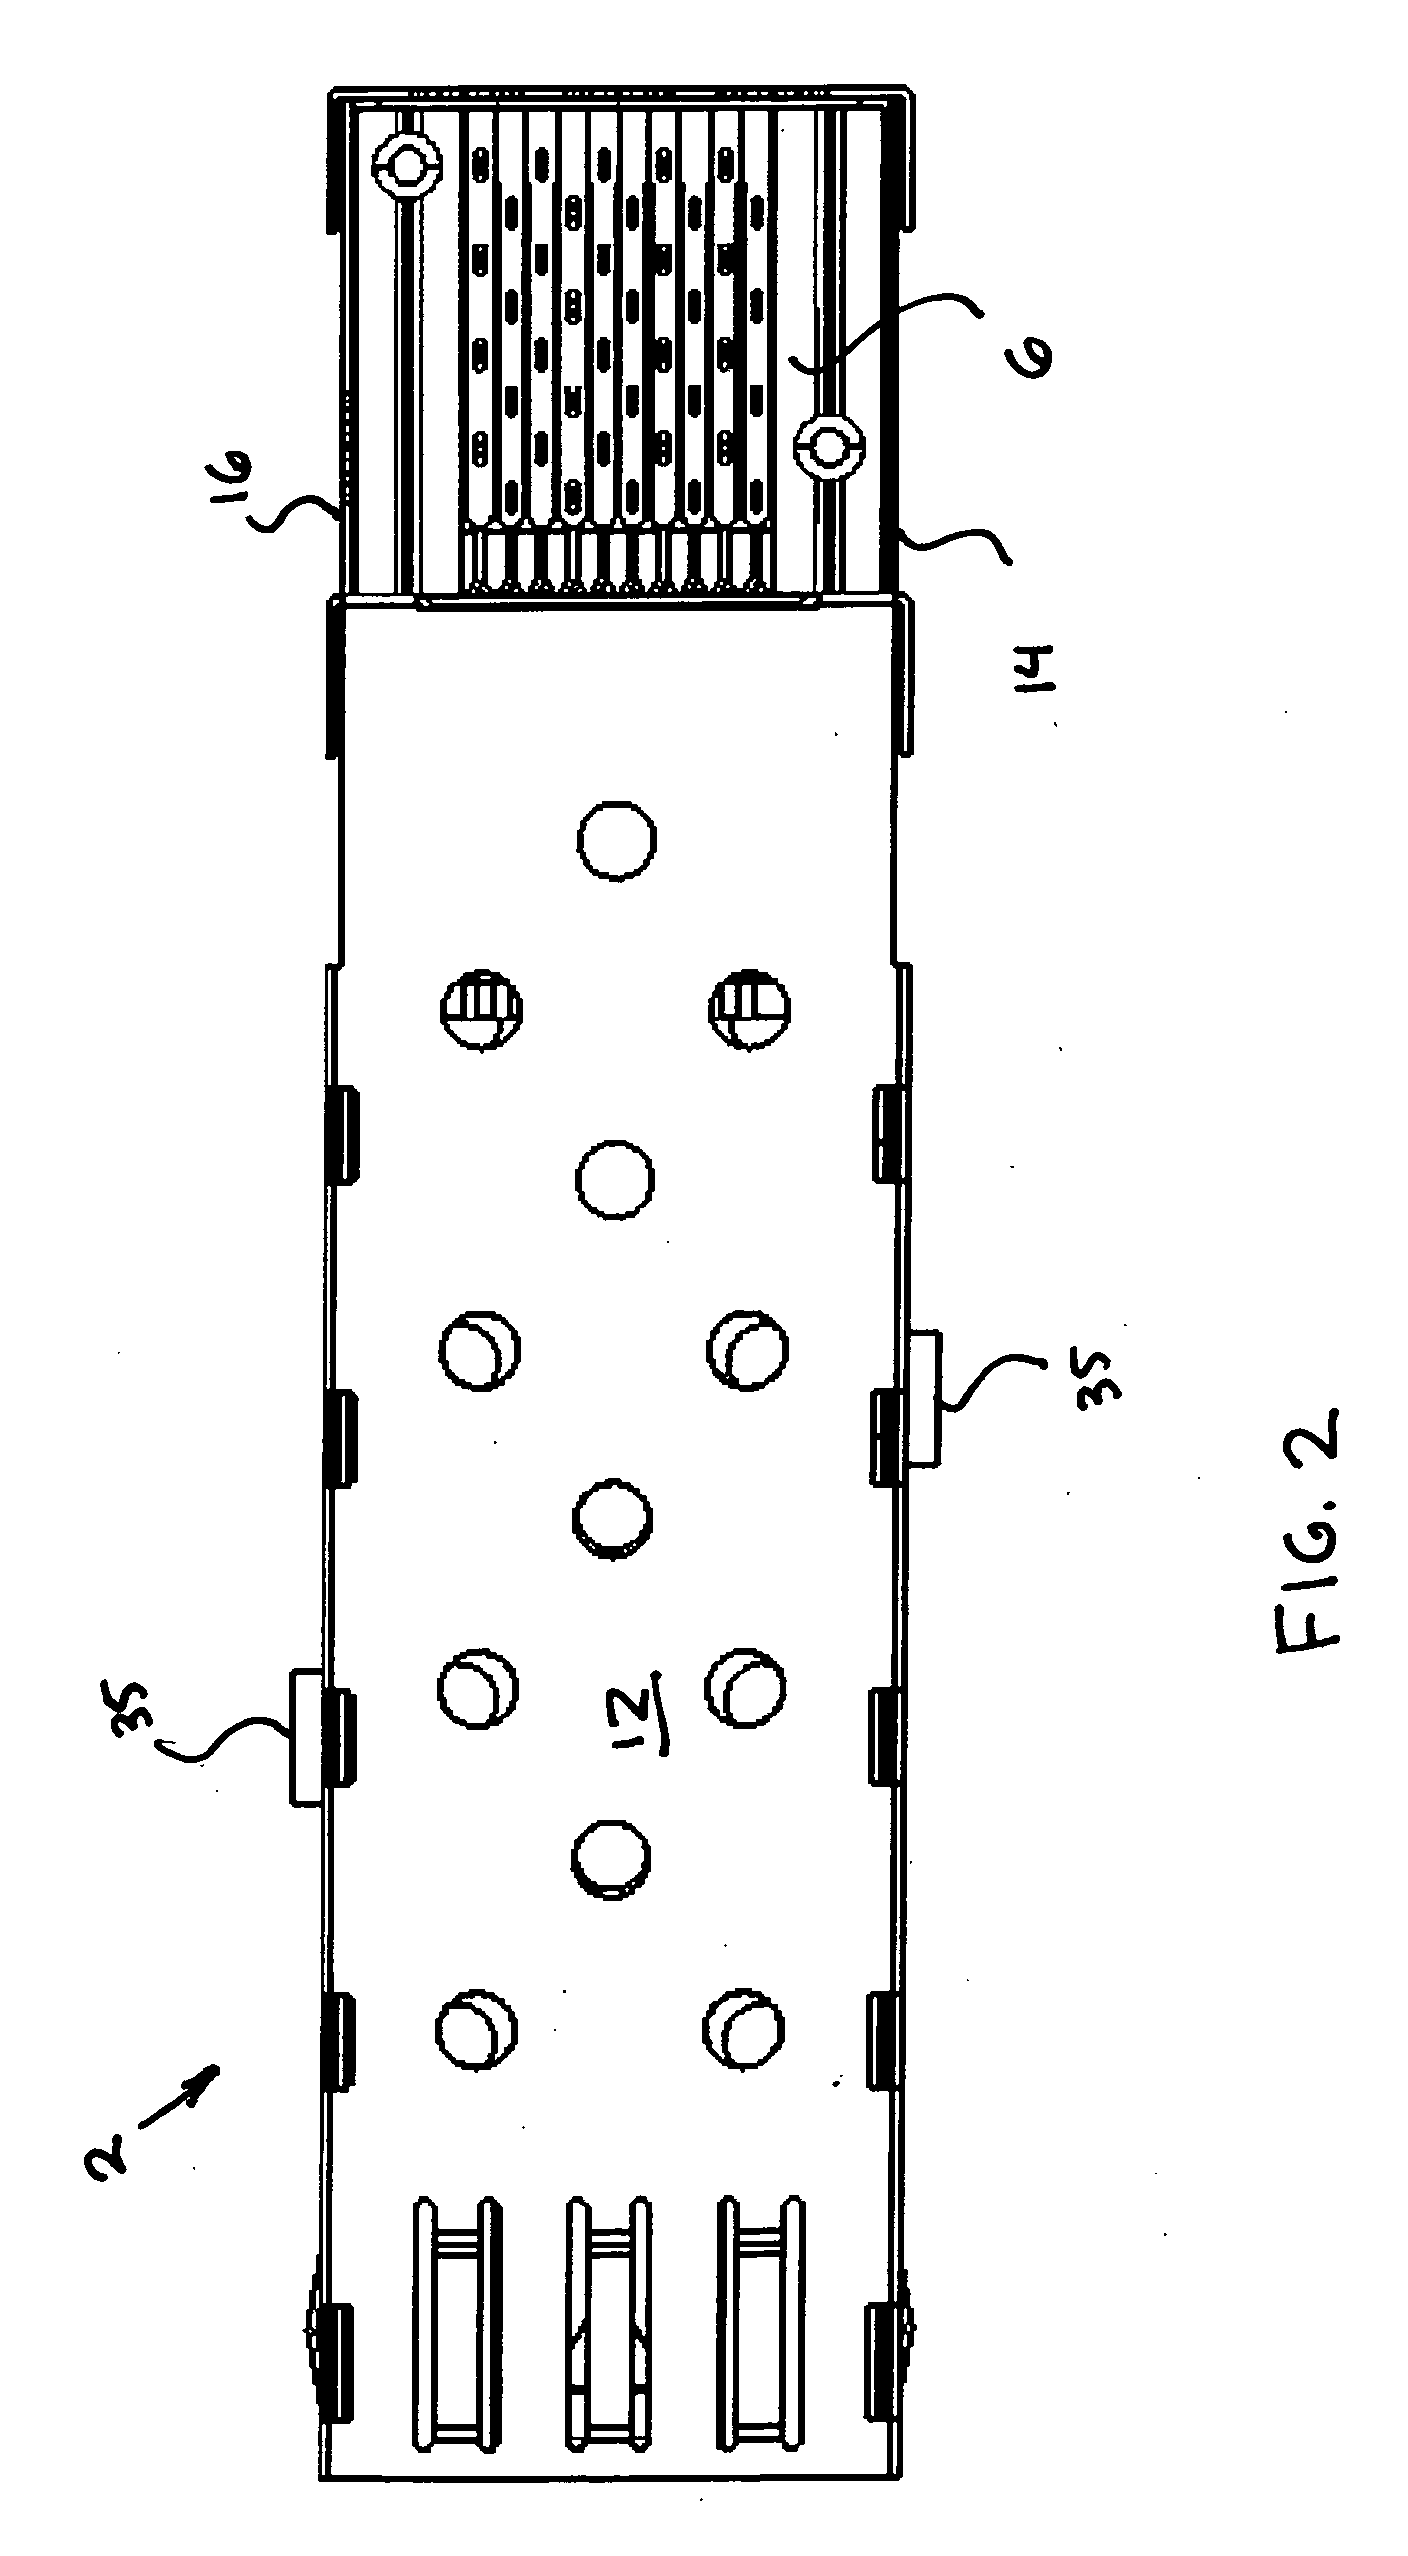 Low-profile connector assembly and methods